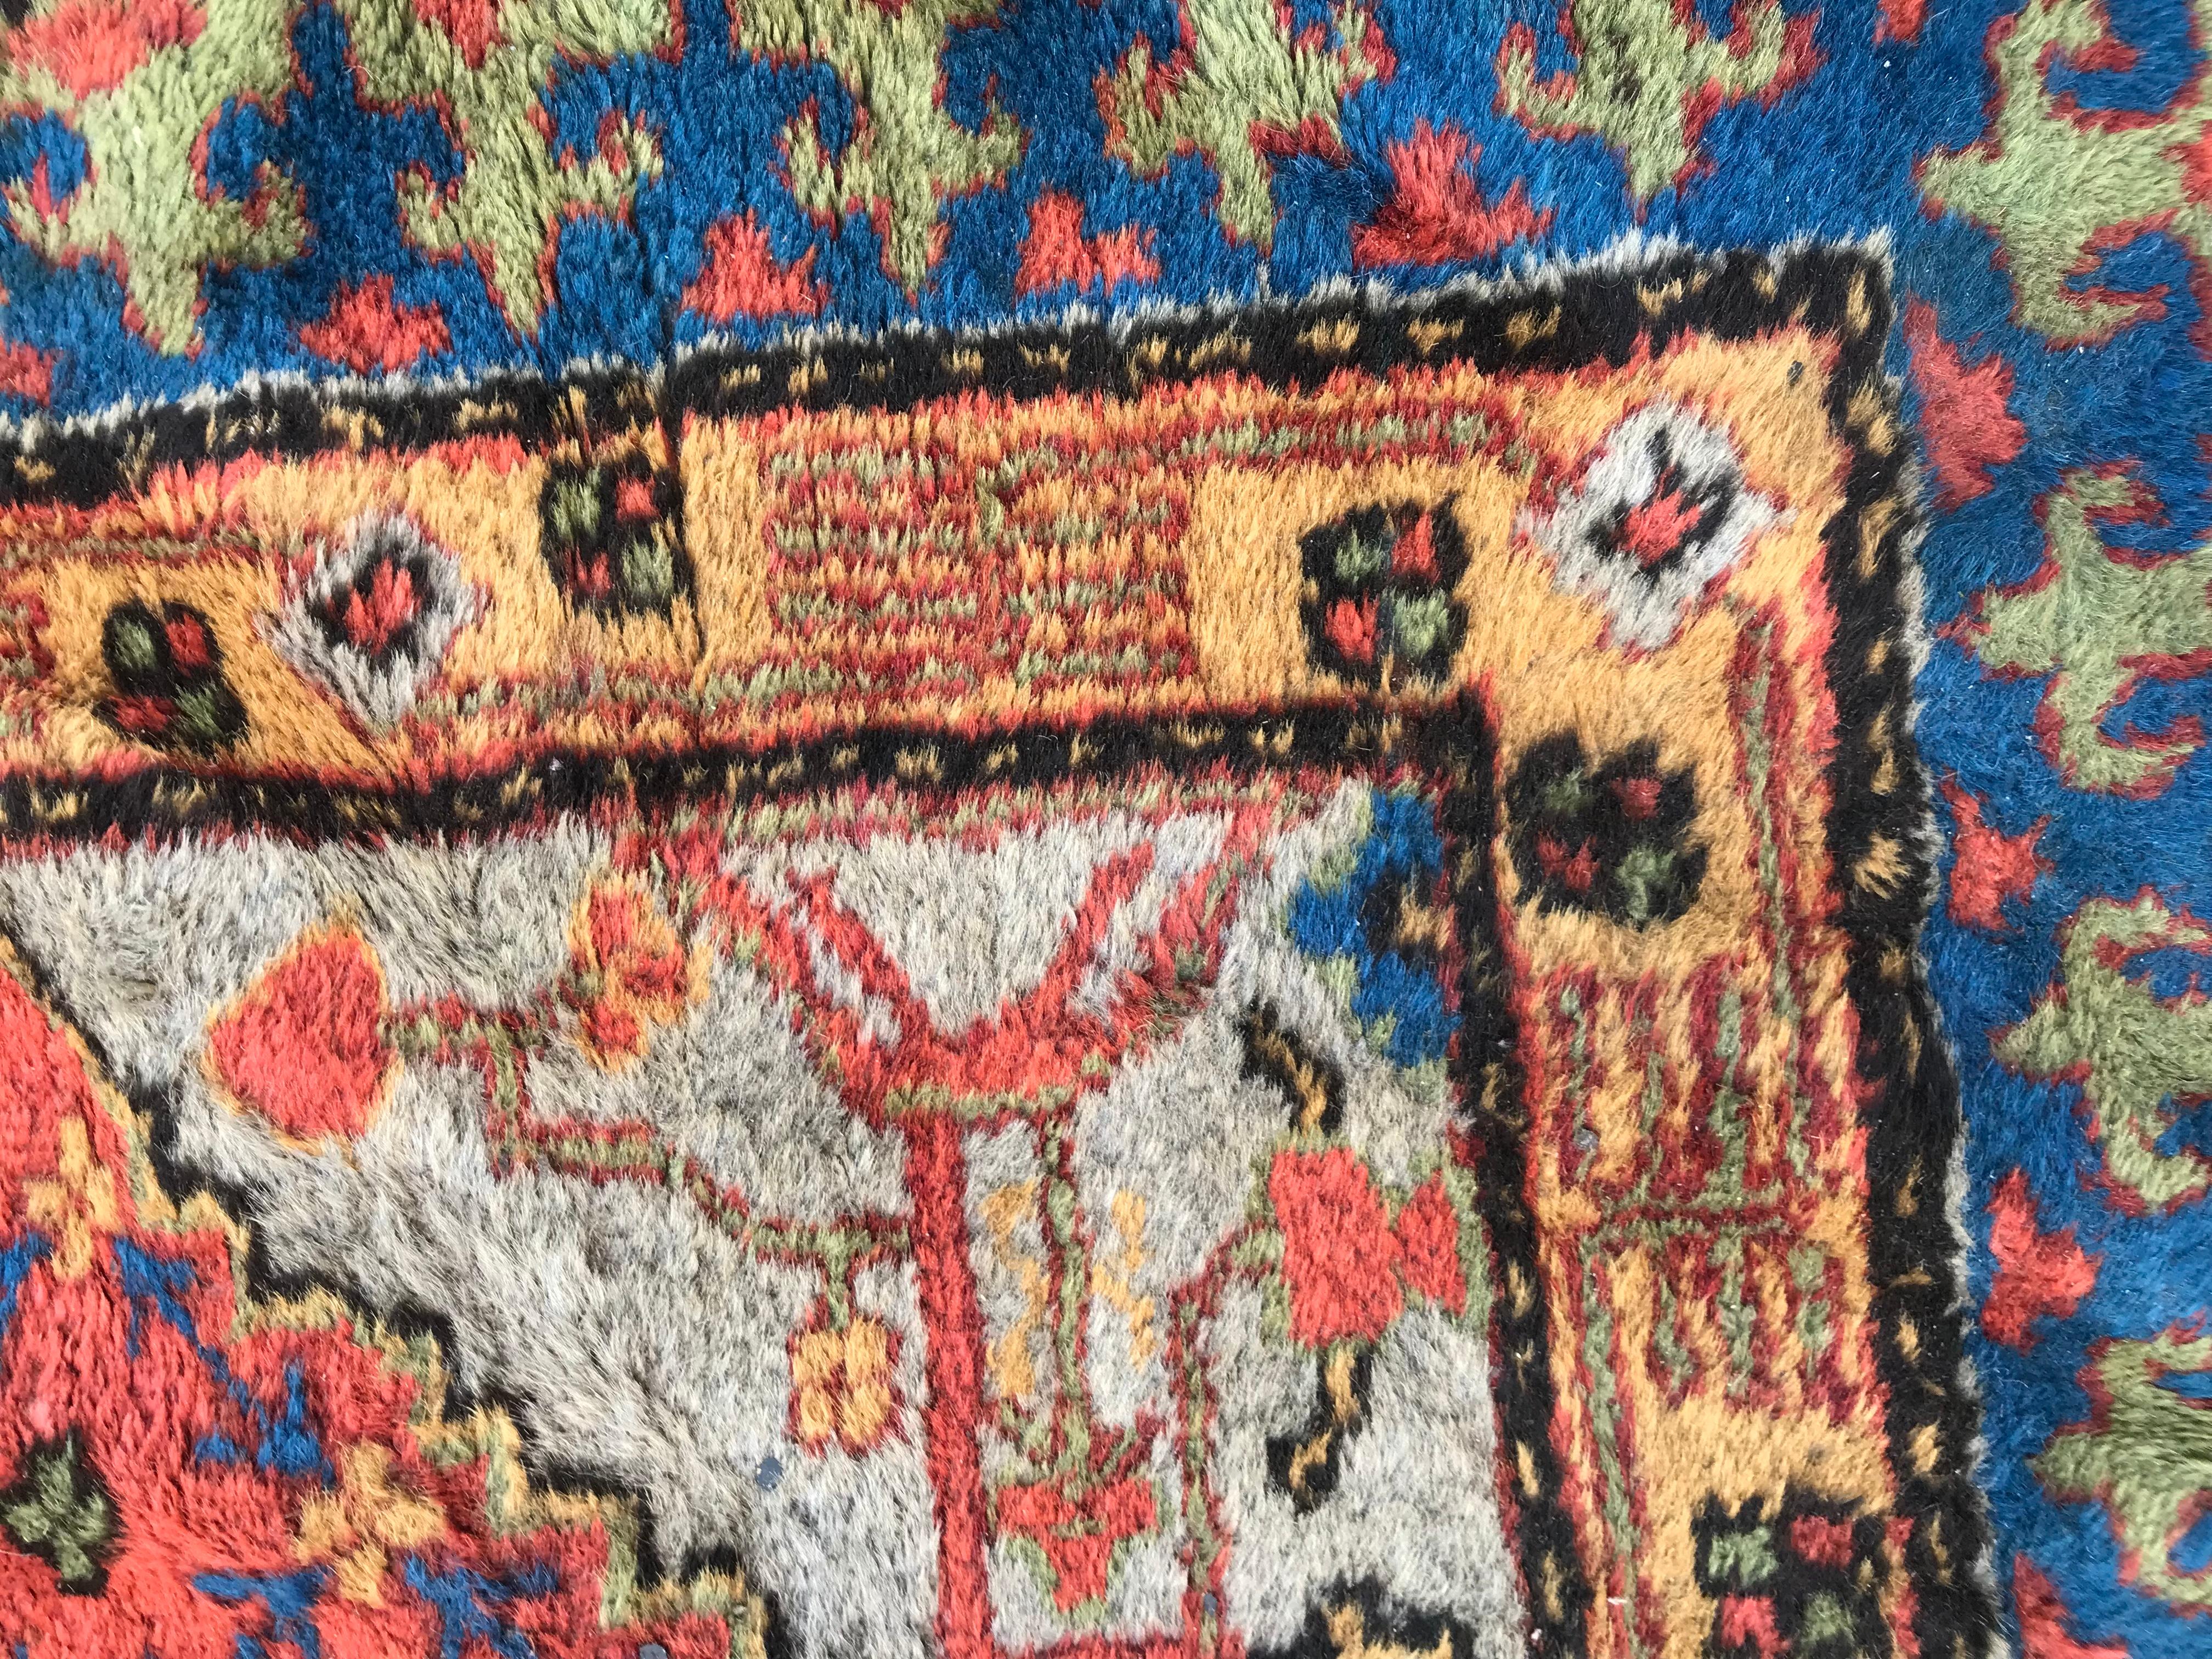 Chinese Little Vintage Sinkiang Rug, Antique Persian Style Rugs, 20th Century Carpets